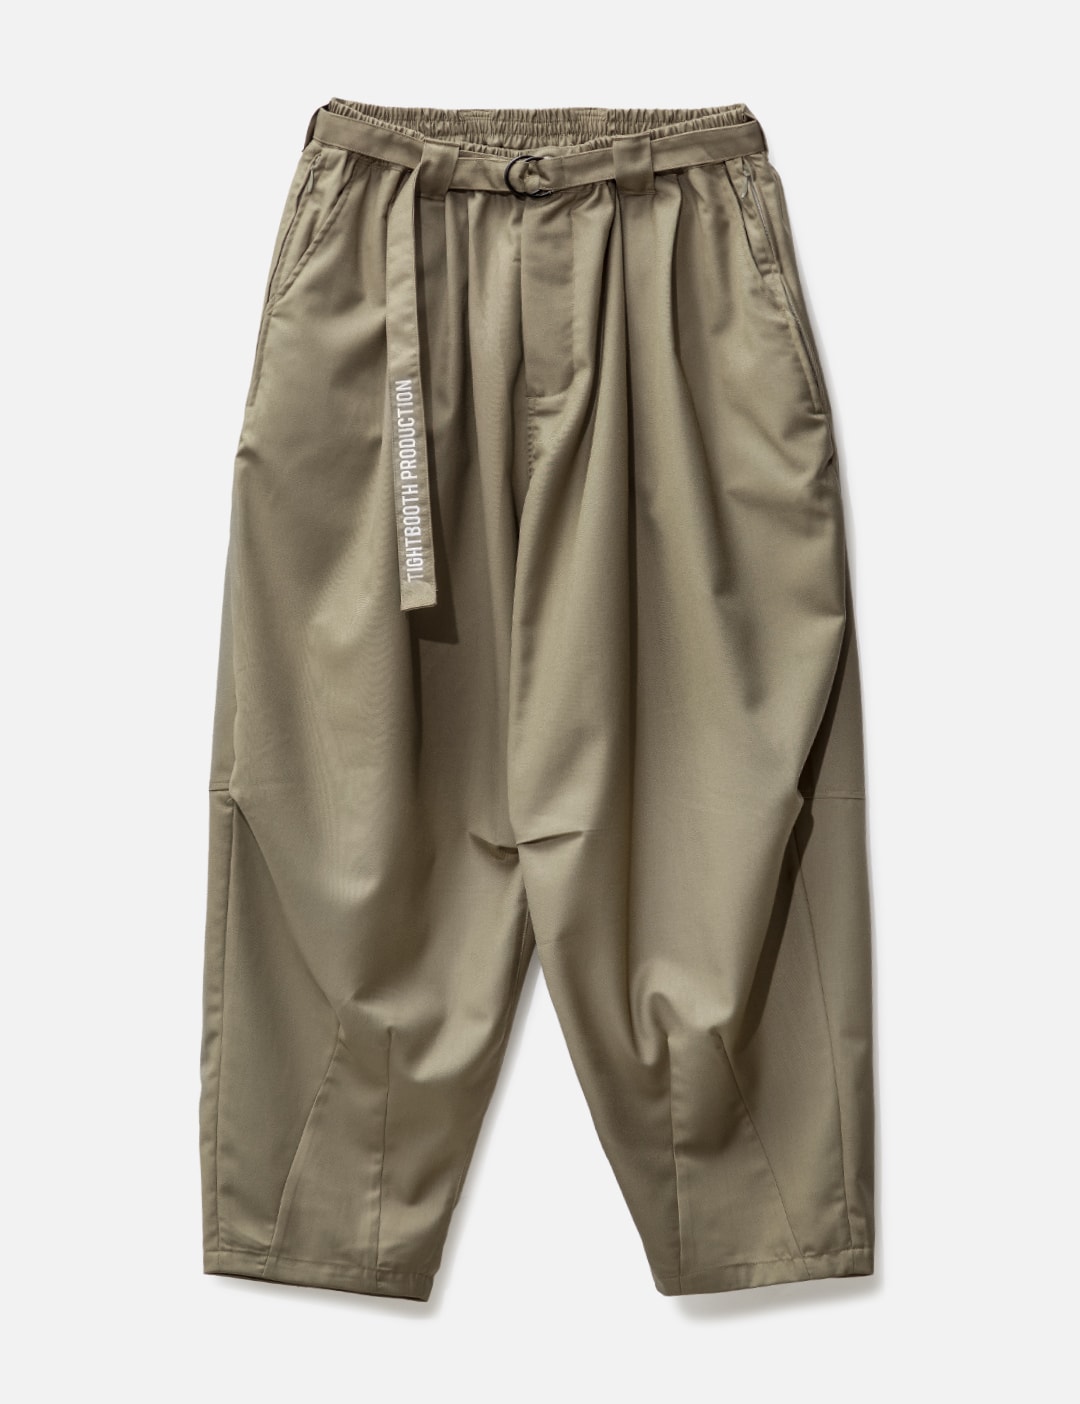 TIGHTBOOTH - Balloon Slacks | HBX - Globally Curated Fashion and ...